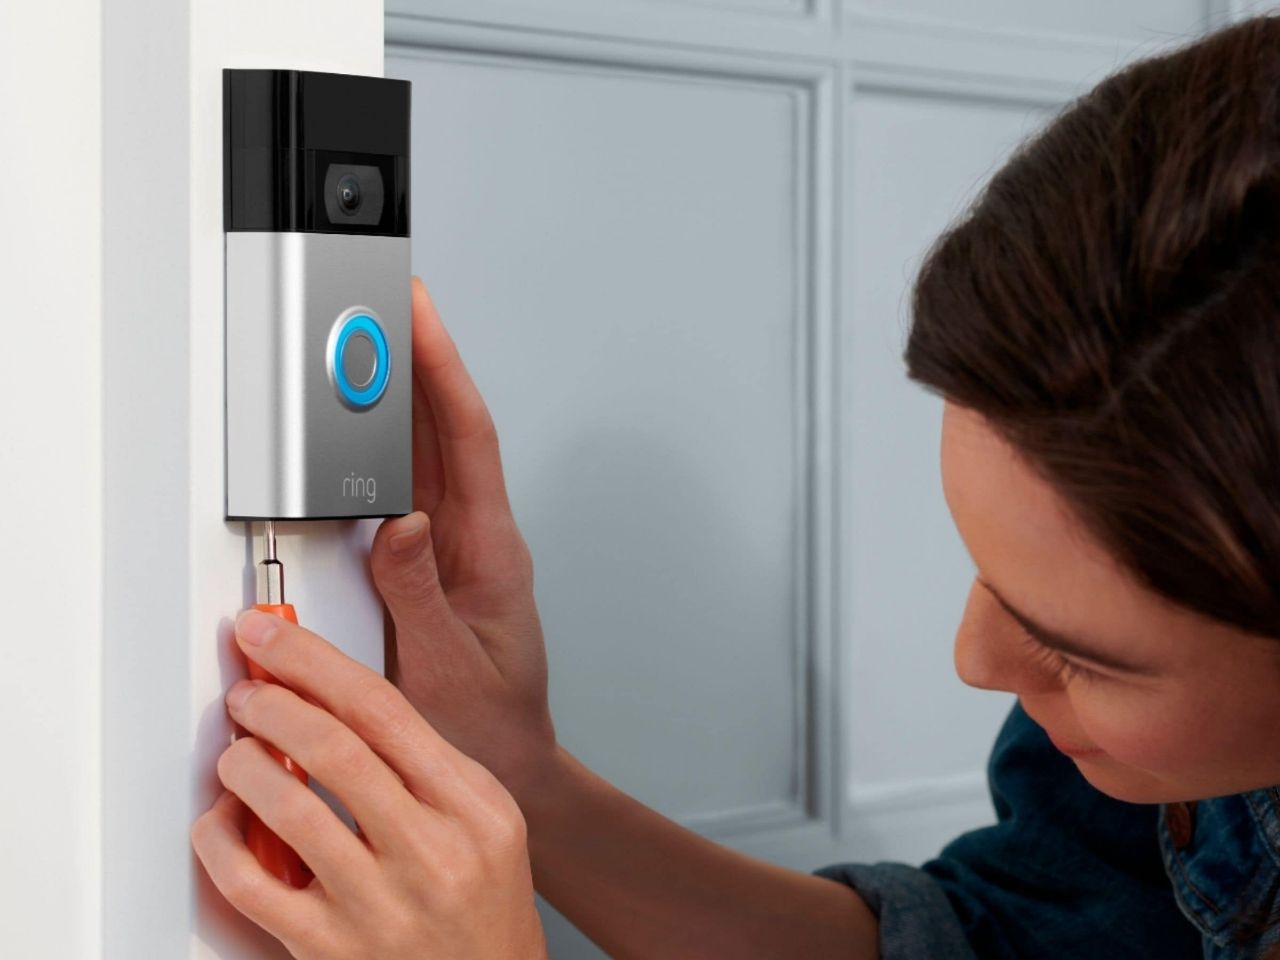 installation - Nest Hello Has Power but Doesn't (Often) Ring Indoor Chime?  - Home Improvement Stack Exchange